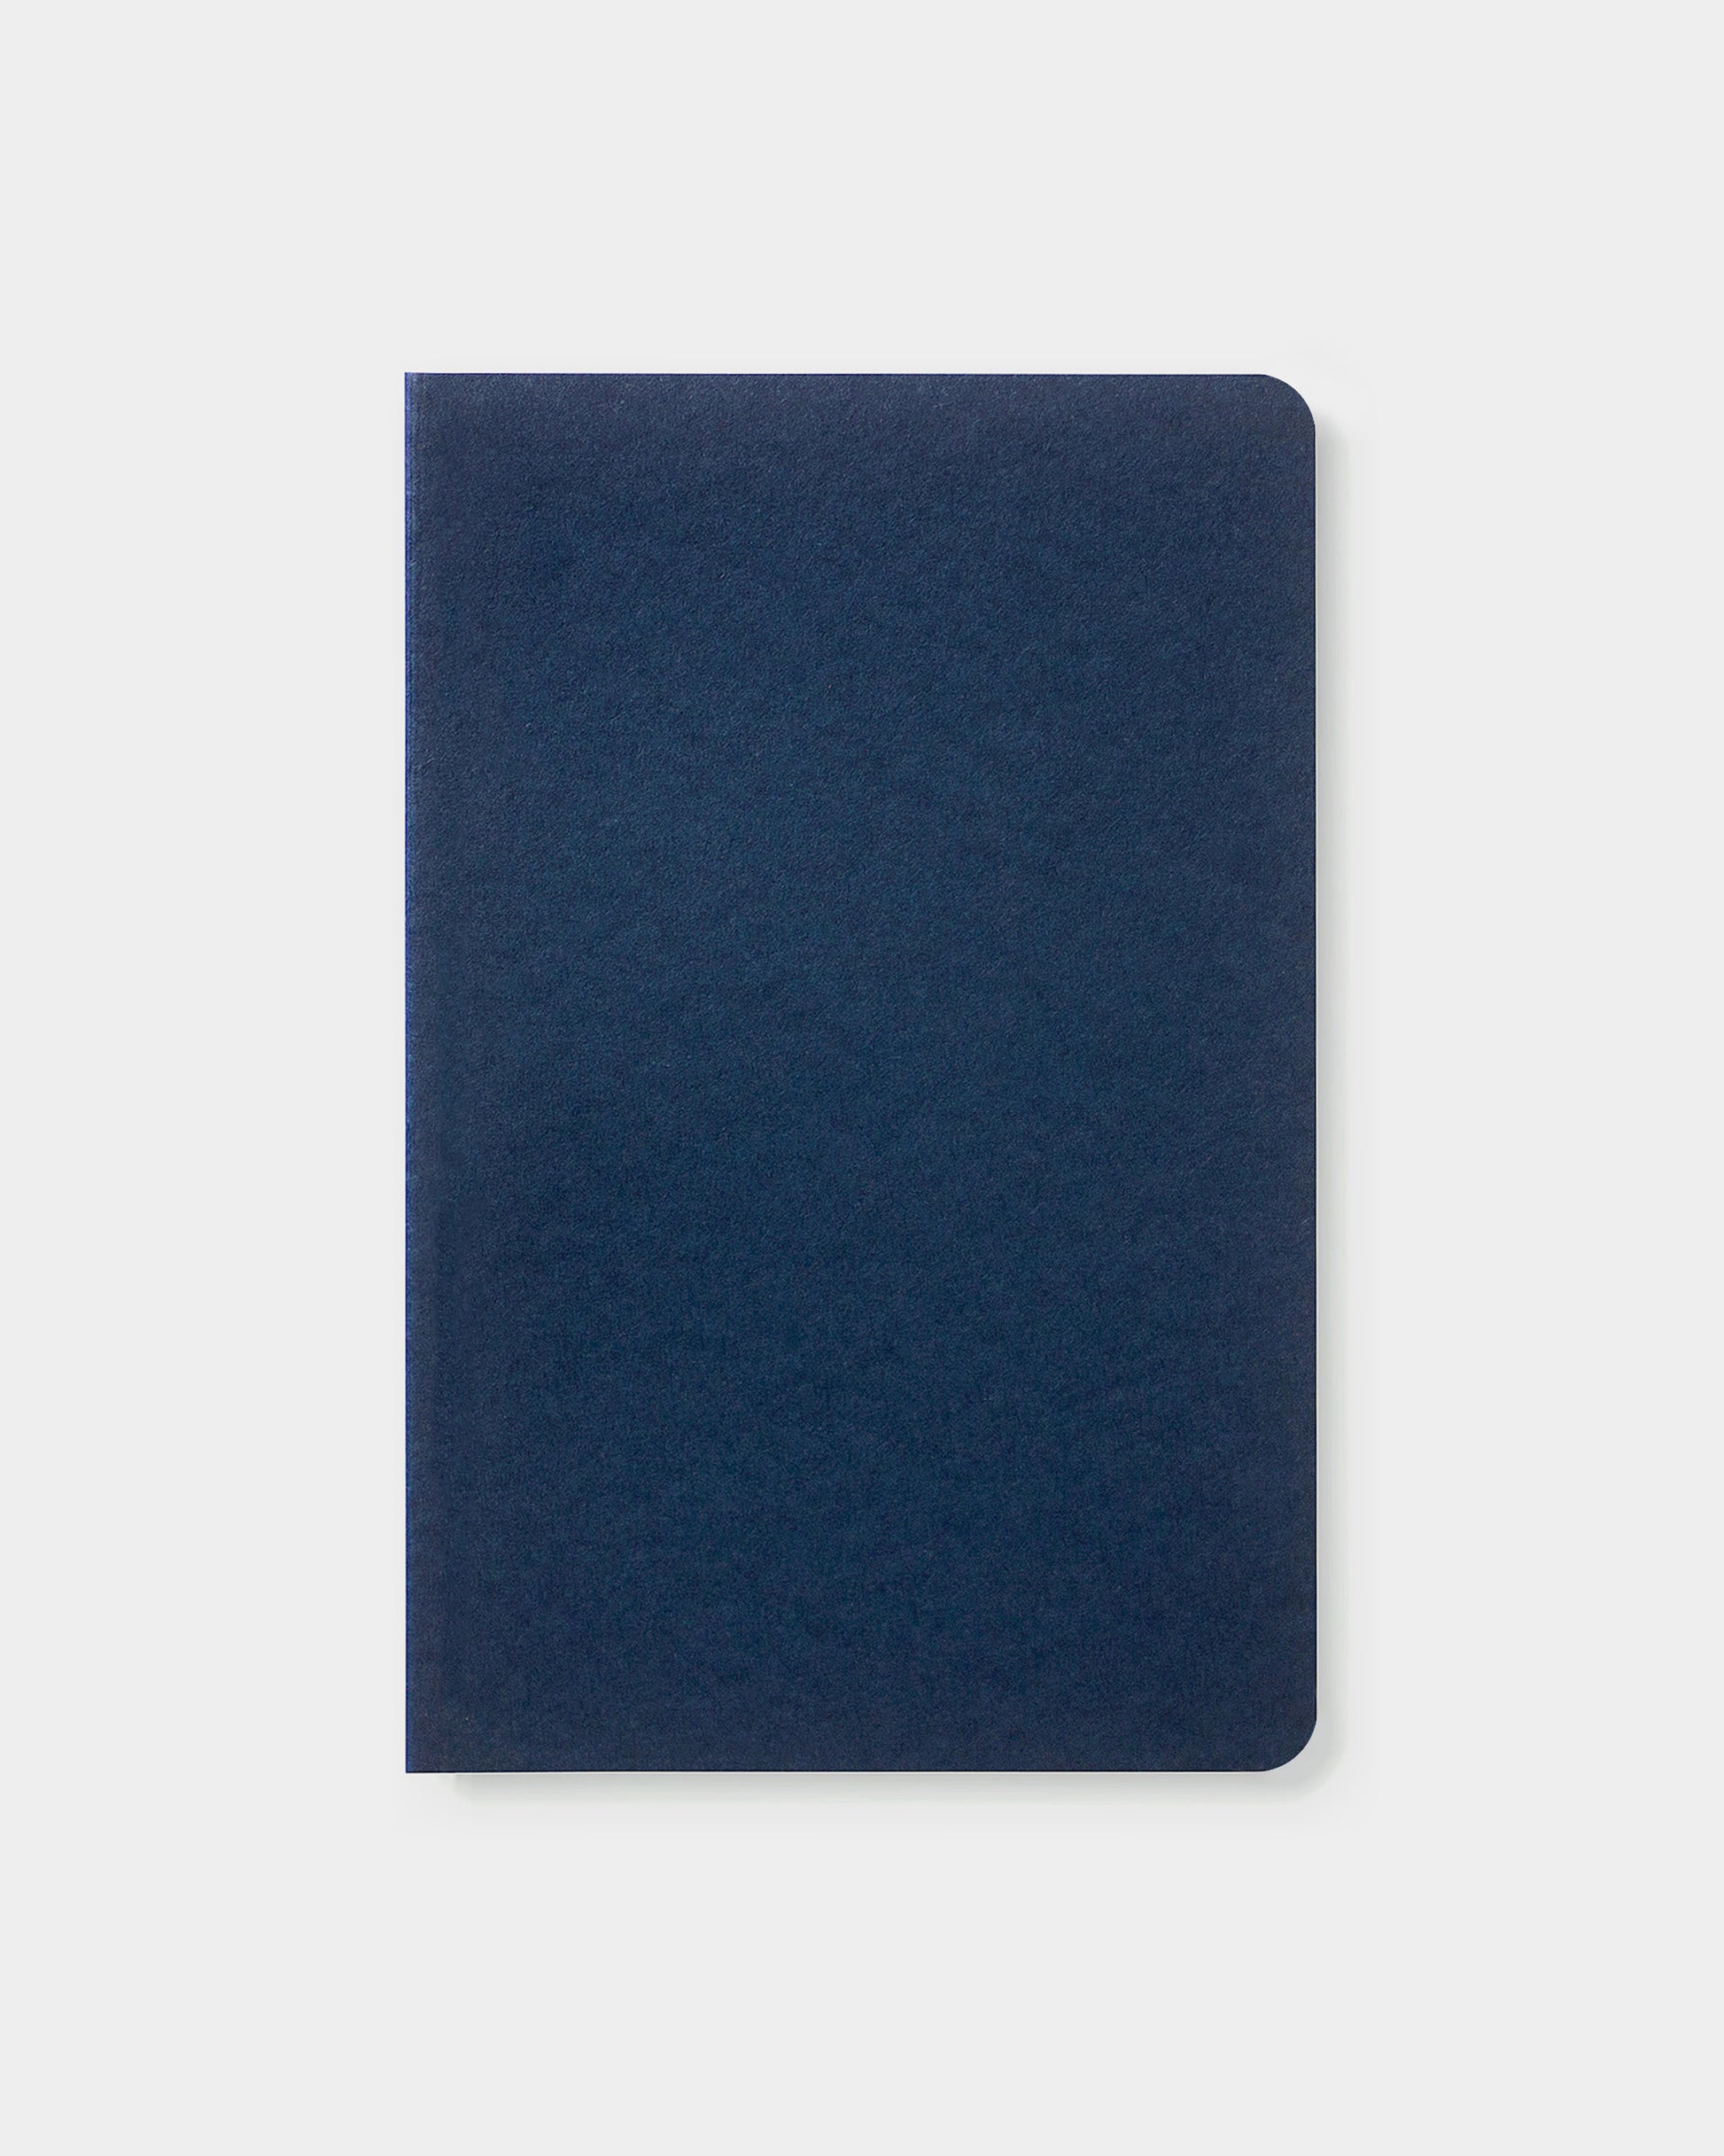 4.25 x 6.5" standard notebook, made with eco-friendly papers. Graph pages, navy color way.